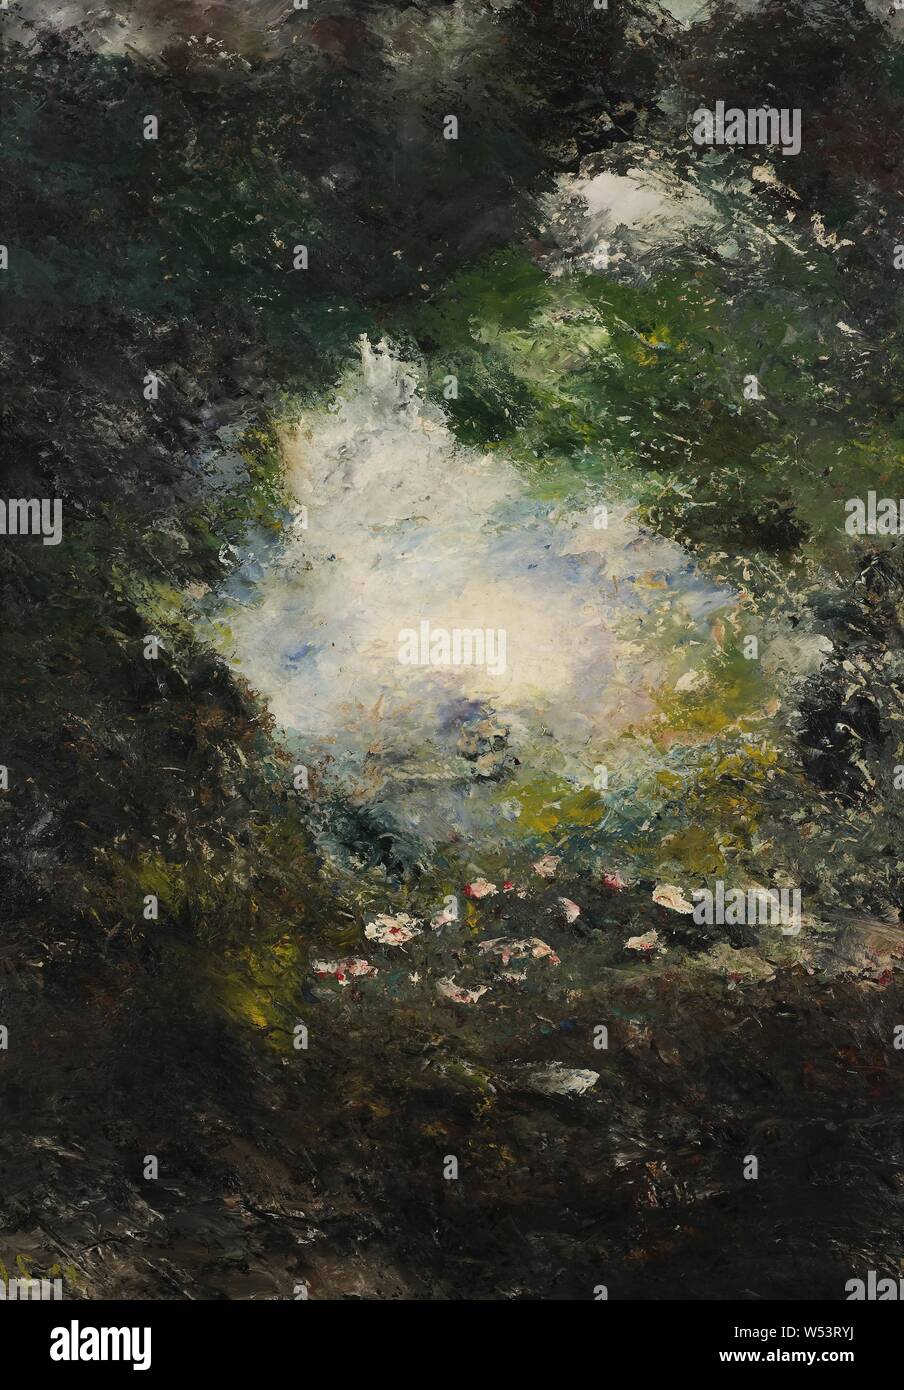 August Strindberg Wonderland Painting 14 Oil On Paperboard Oil On Cardboard Height 72 5 Cm 28 5 Inches Width 52 Cm 4 Inches Signed A S 94 Stock Photo Alamy